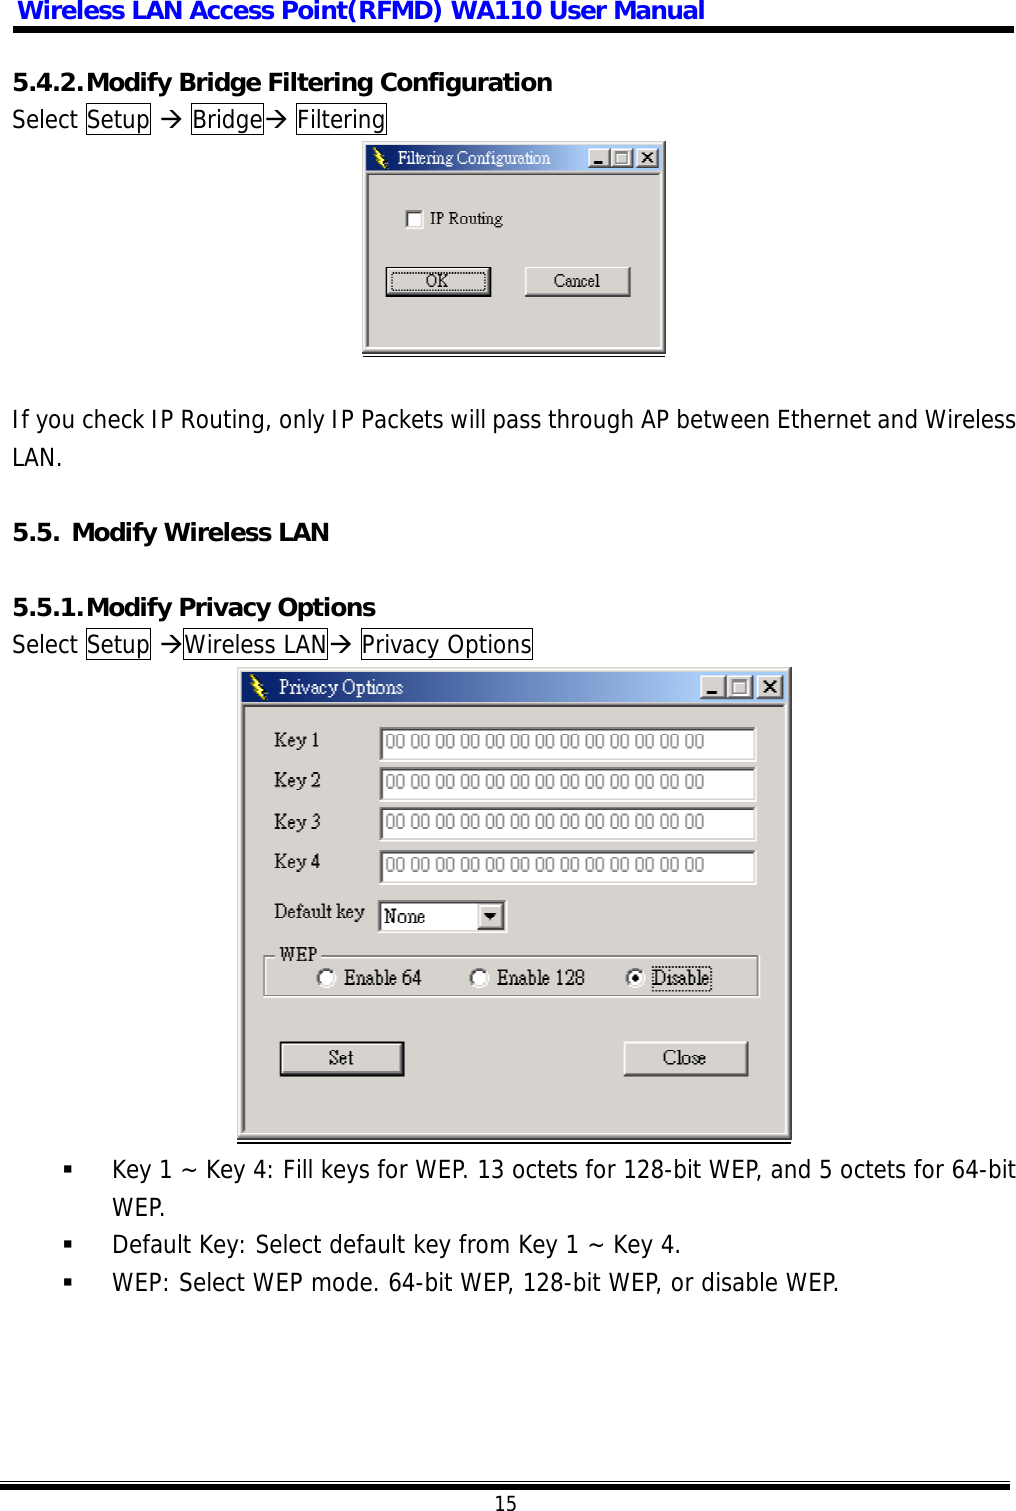 Wireless LAN Access Point(RFMD) WA110 User Manual  15  5.4.2. Modify Bridge Filtering Configuration Select Setup  Bridge Filtering    If you check IP Routing, only IP Packets will pass through AP between Ethernet and Wireless LAN.  5.5. Modify Wireless LAN  5.5.1. Modify Privacy Options Select Setup Wireless LAN Privacy Options     Key 1 ~ Key 4: Fill keys for WEP. 13 octets for 128-bit WEP, and 5 octets for 64-bit WEP.   Default Key: Select default key from Key 1 ~ Key 4.   WEP: Select WEP mode. 64-bit WEP, 128-bit WEP, or disable WEP.  